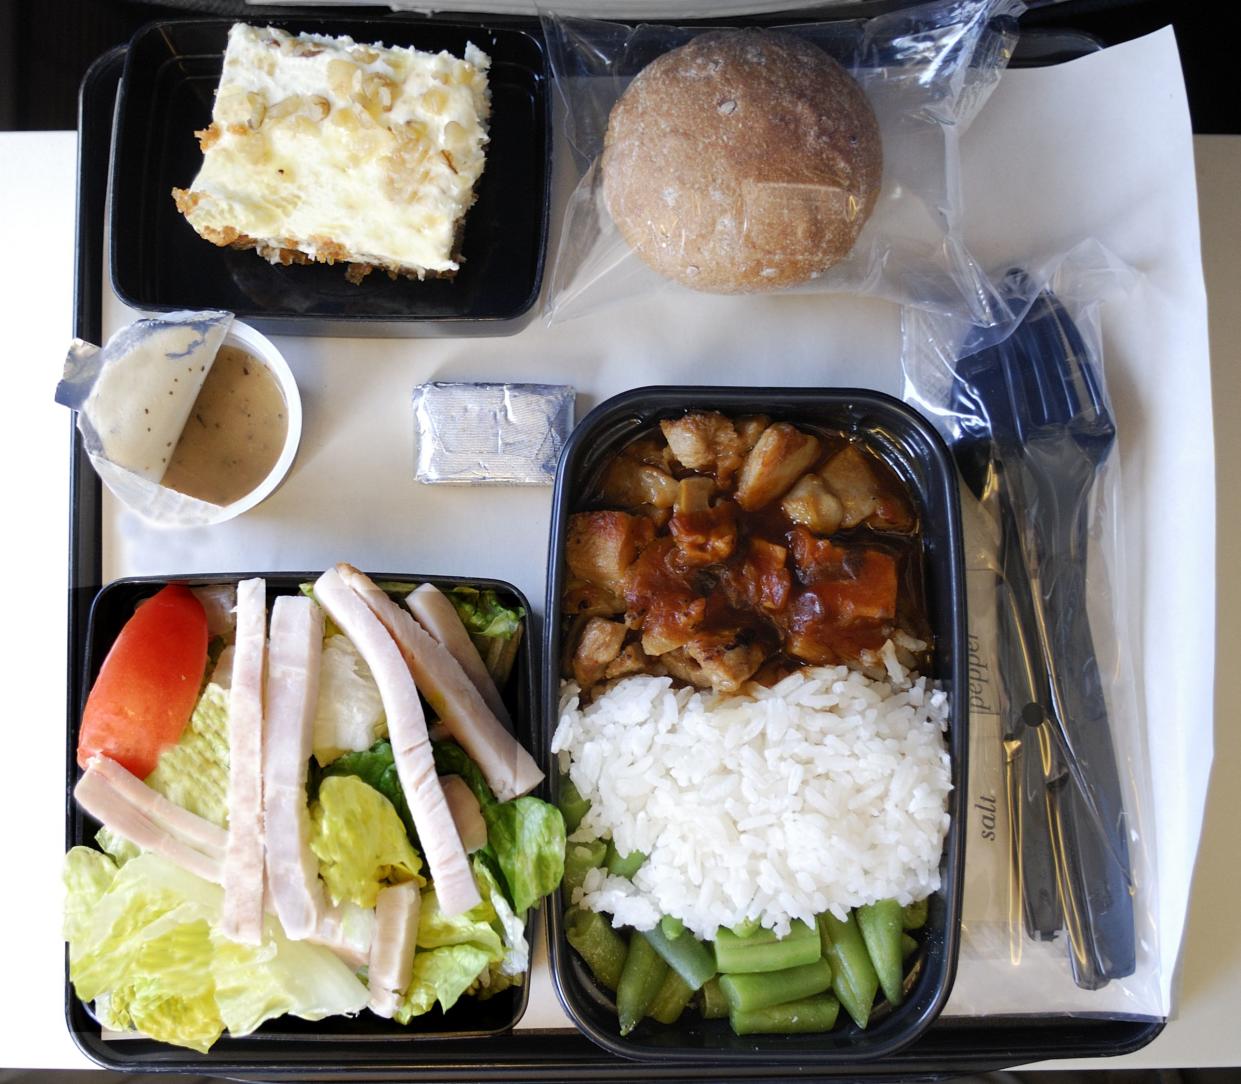 Tray of food from airline travel.